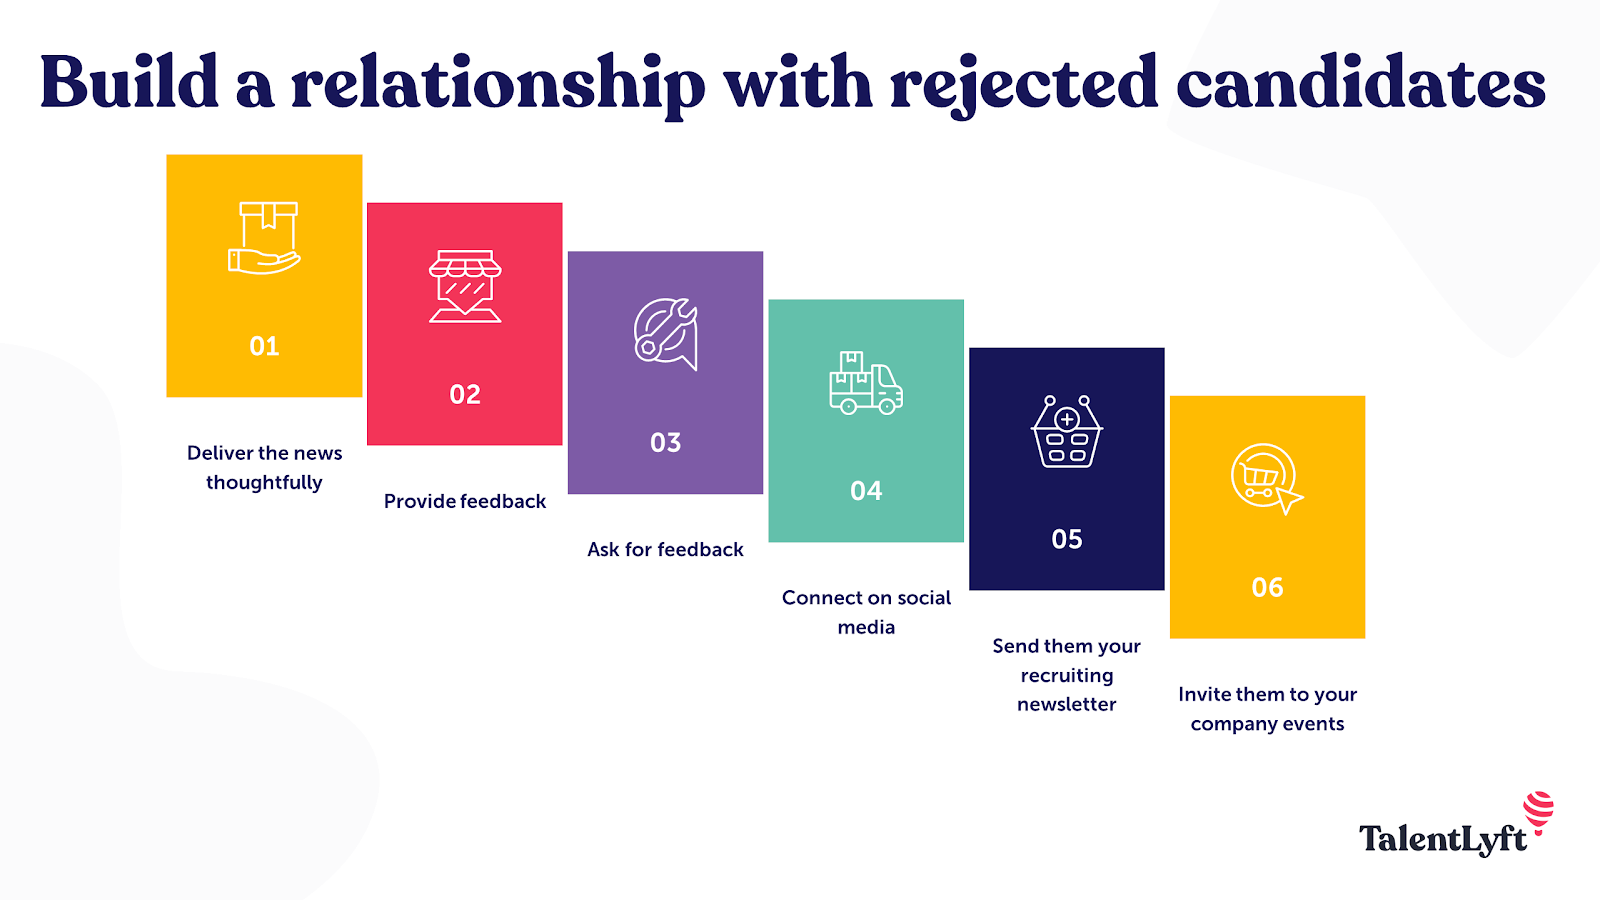 turn rejected candidates into employer brand ambassadors